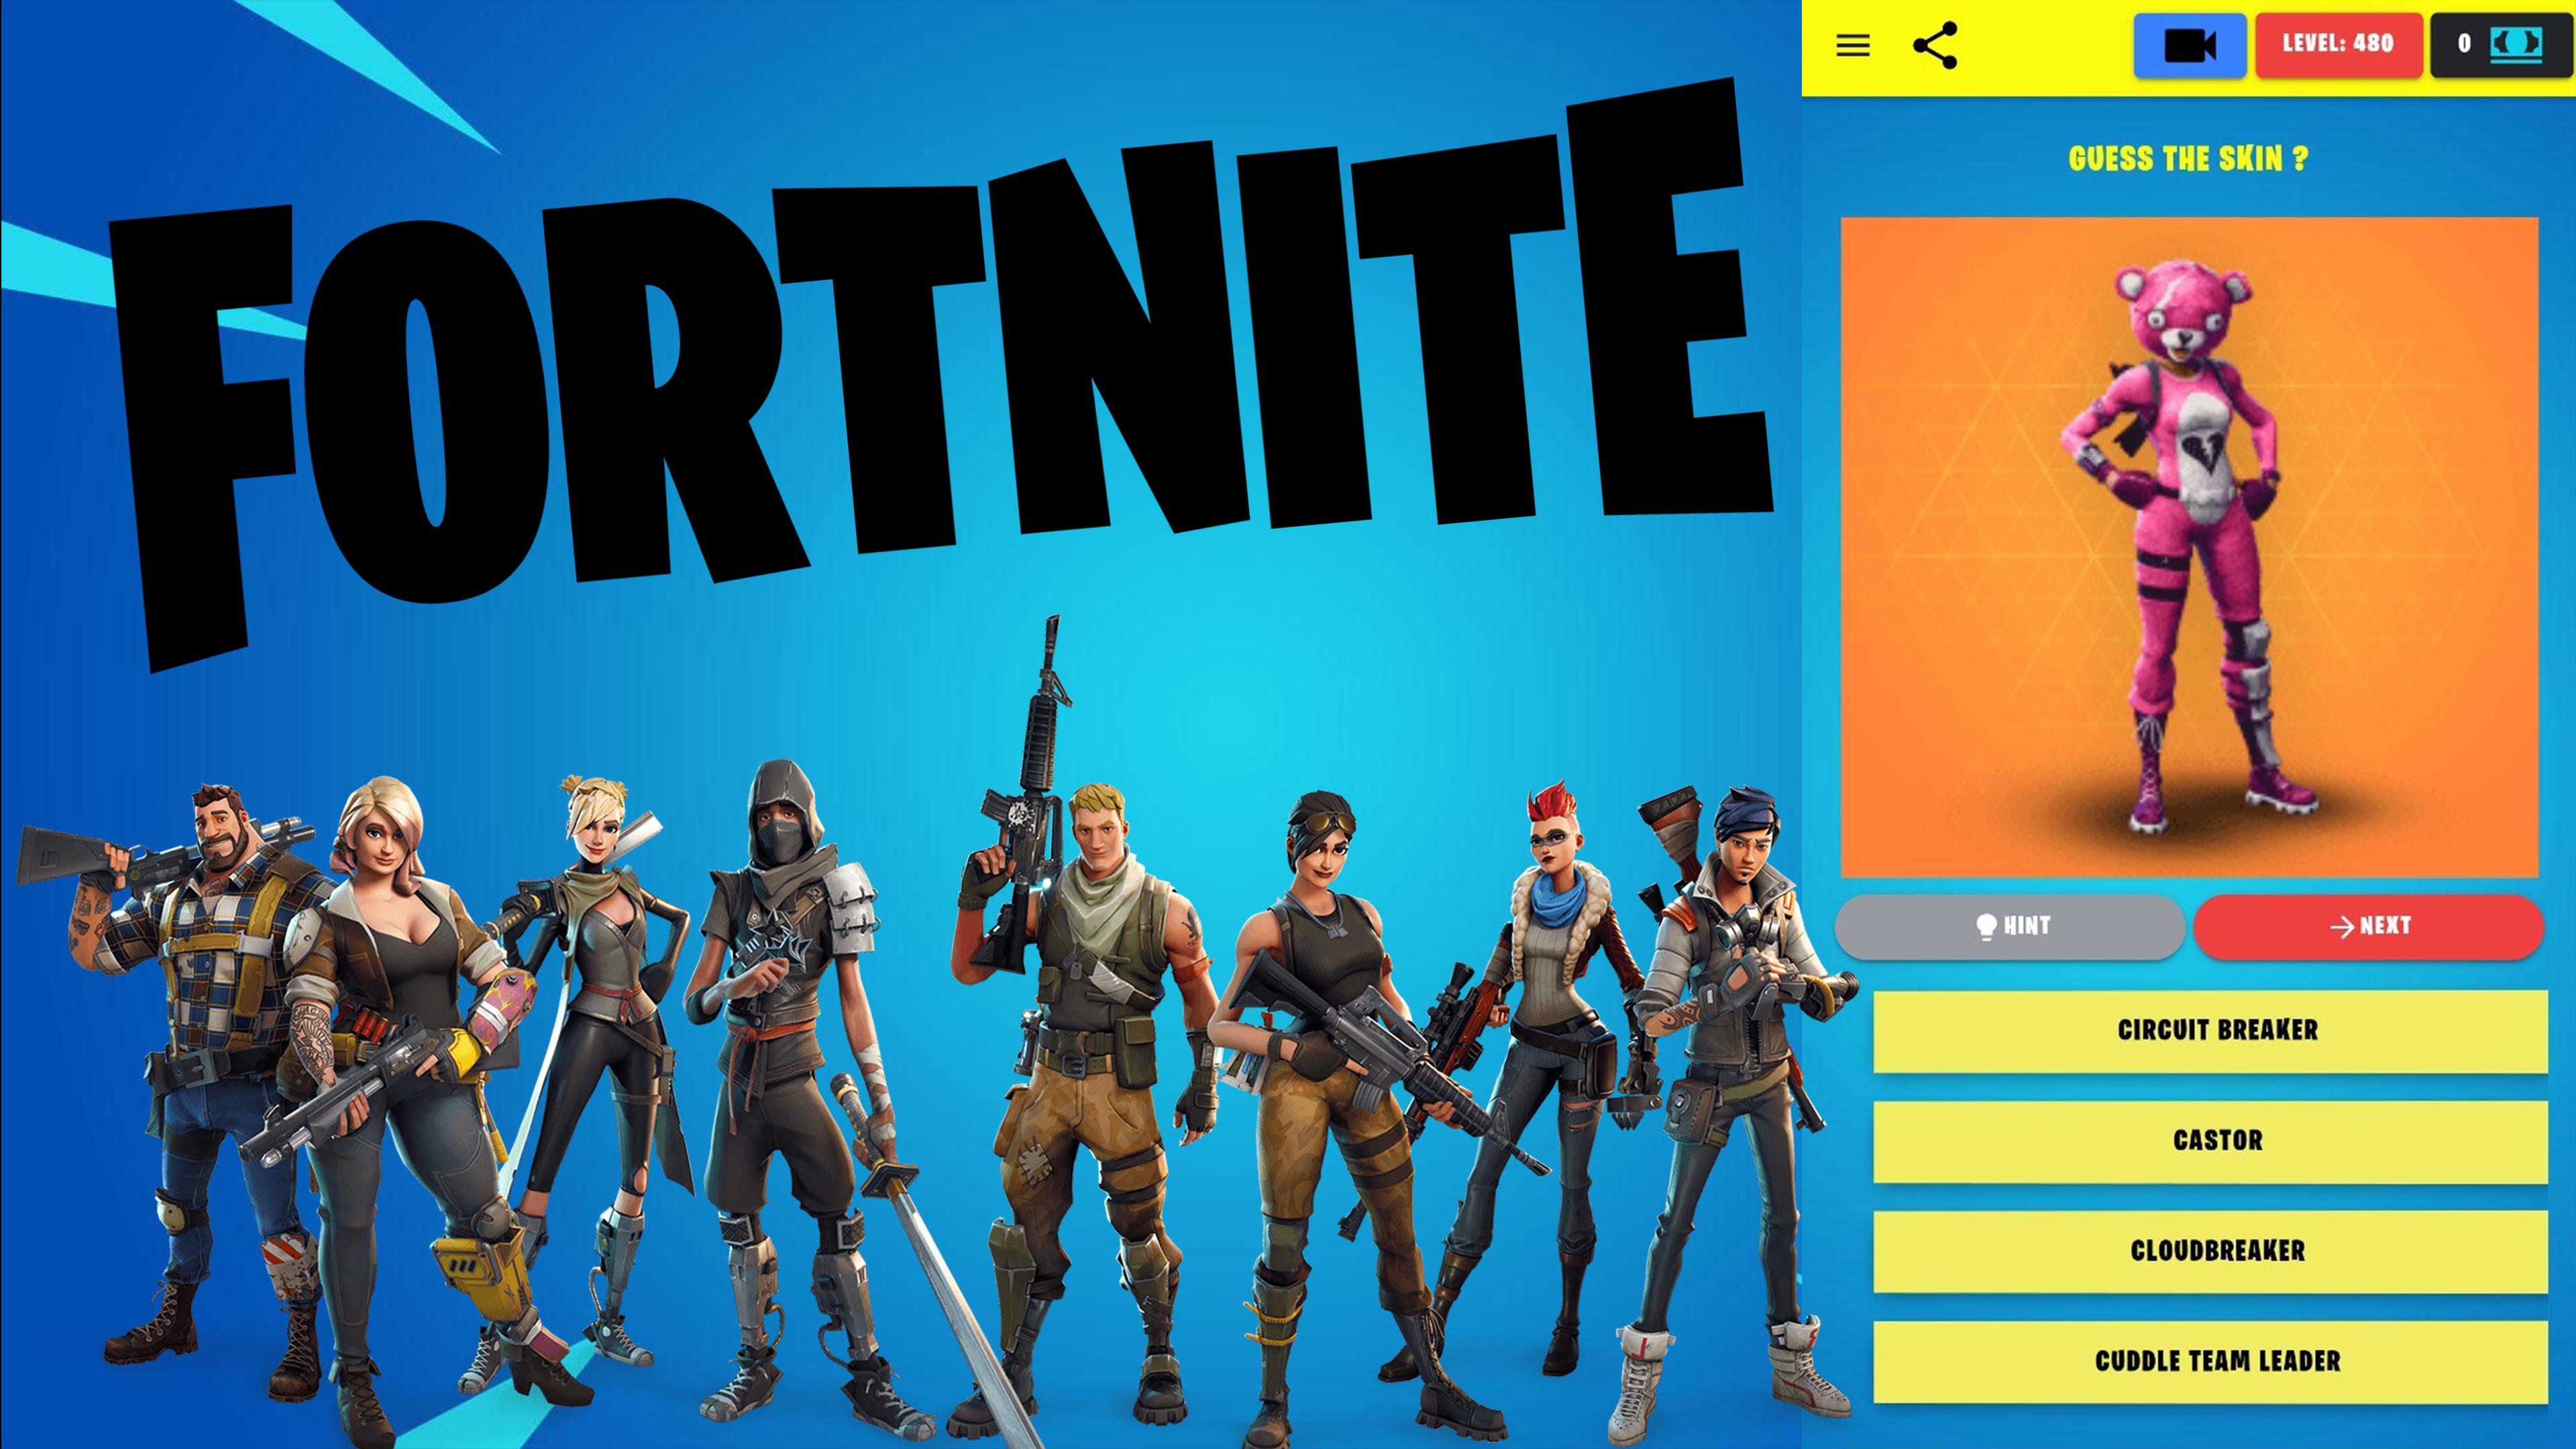 Guess : Dances and skins Fortnite Battle royale for Android - APK Download